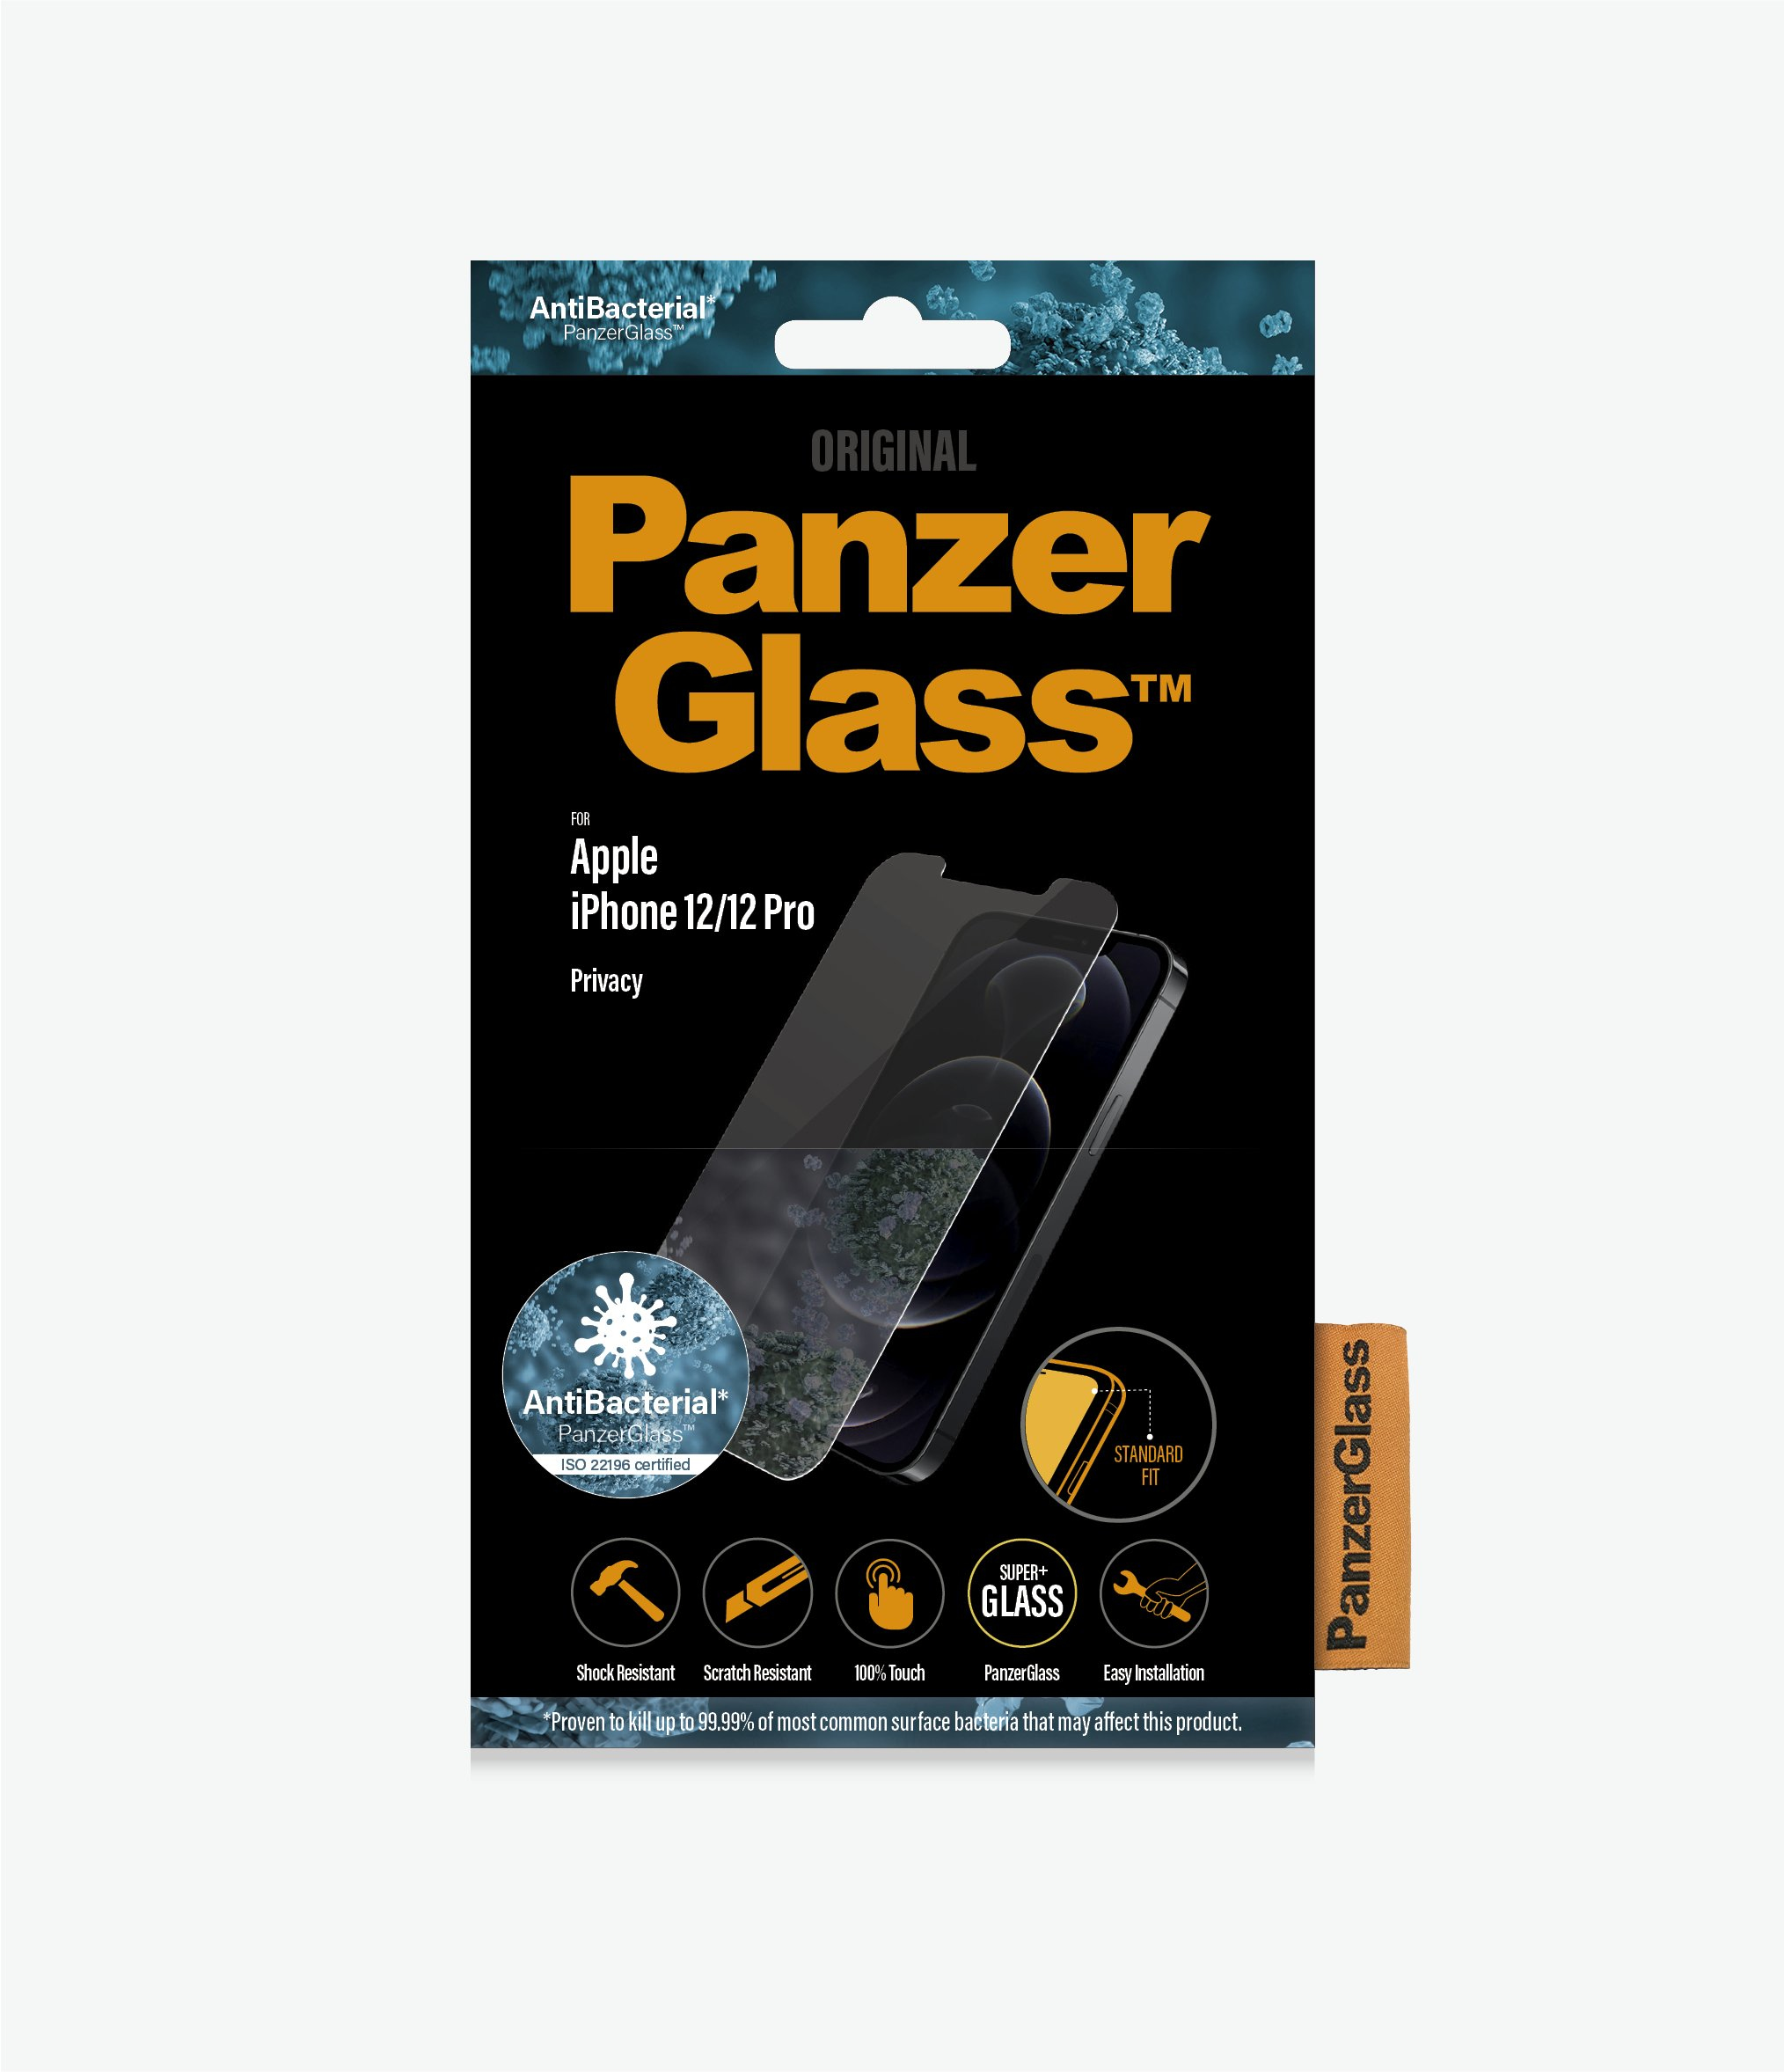 Panzer Glass Standard Fit Privacy for iPhone 12 Pro/12